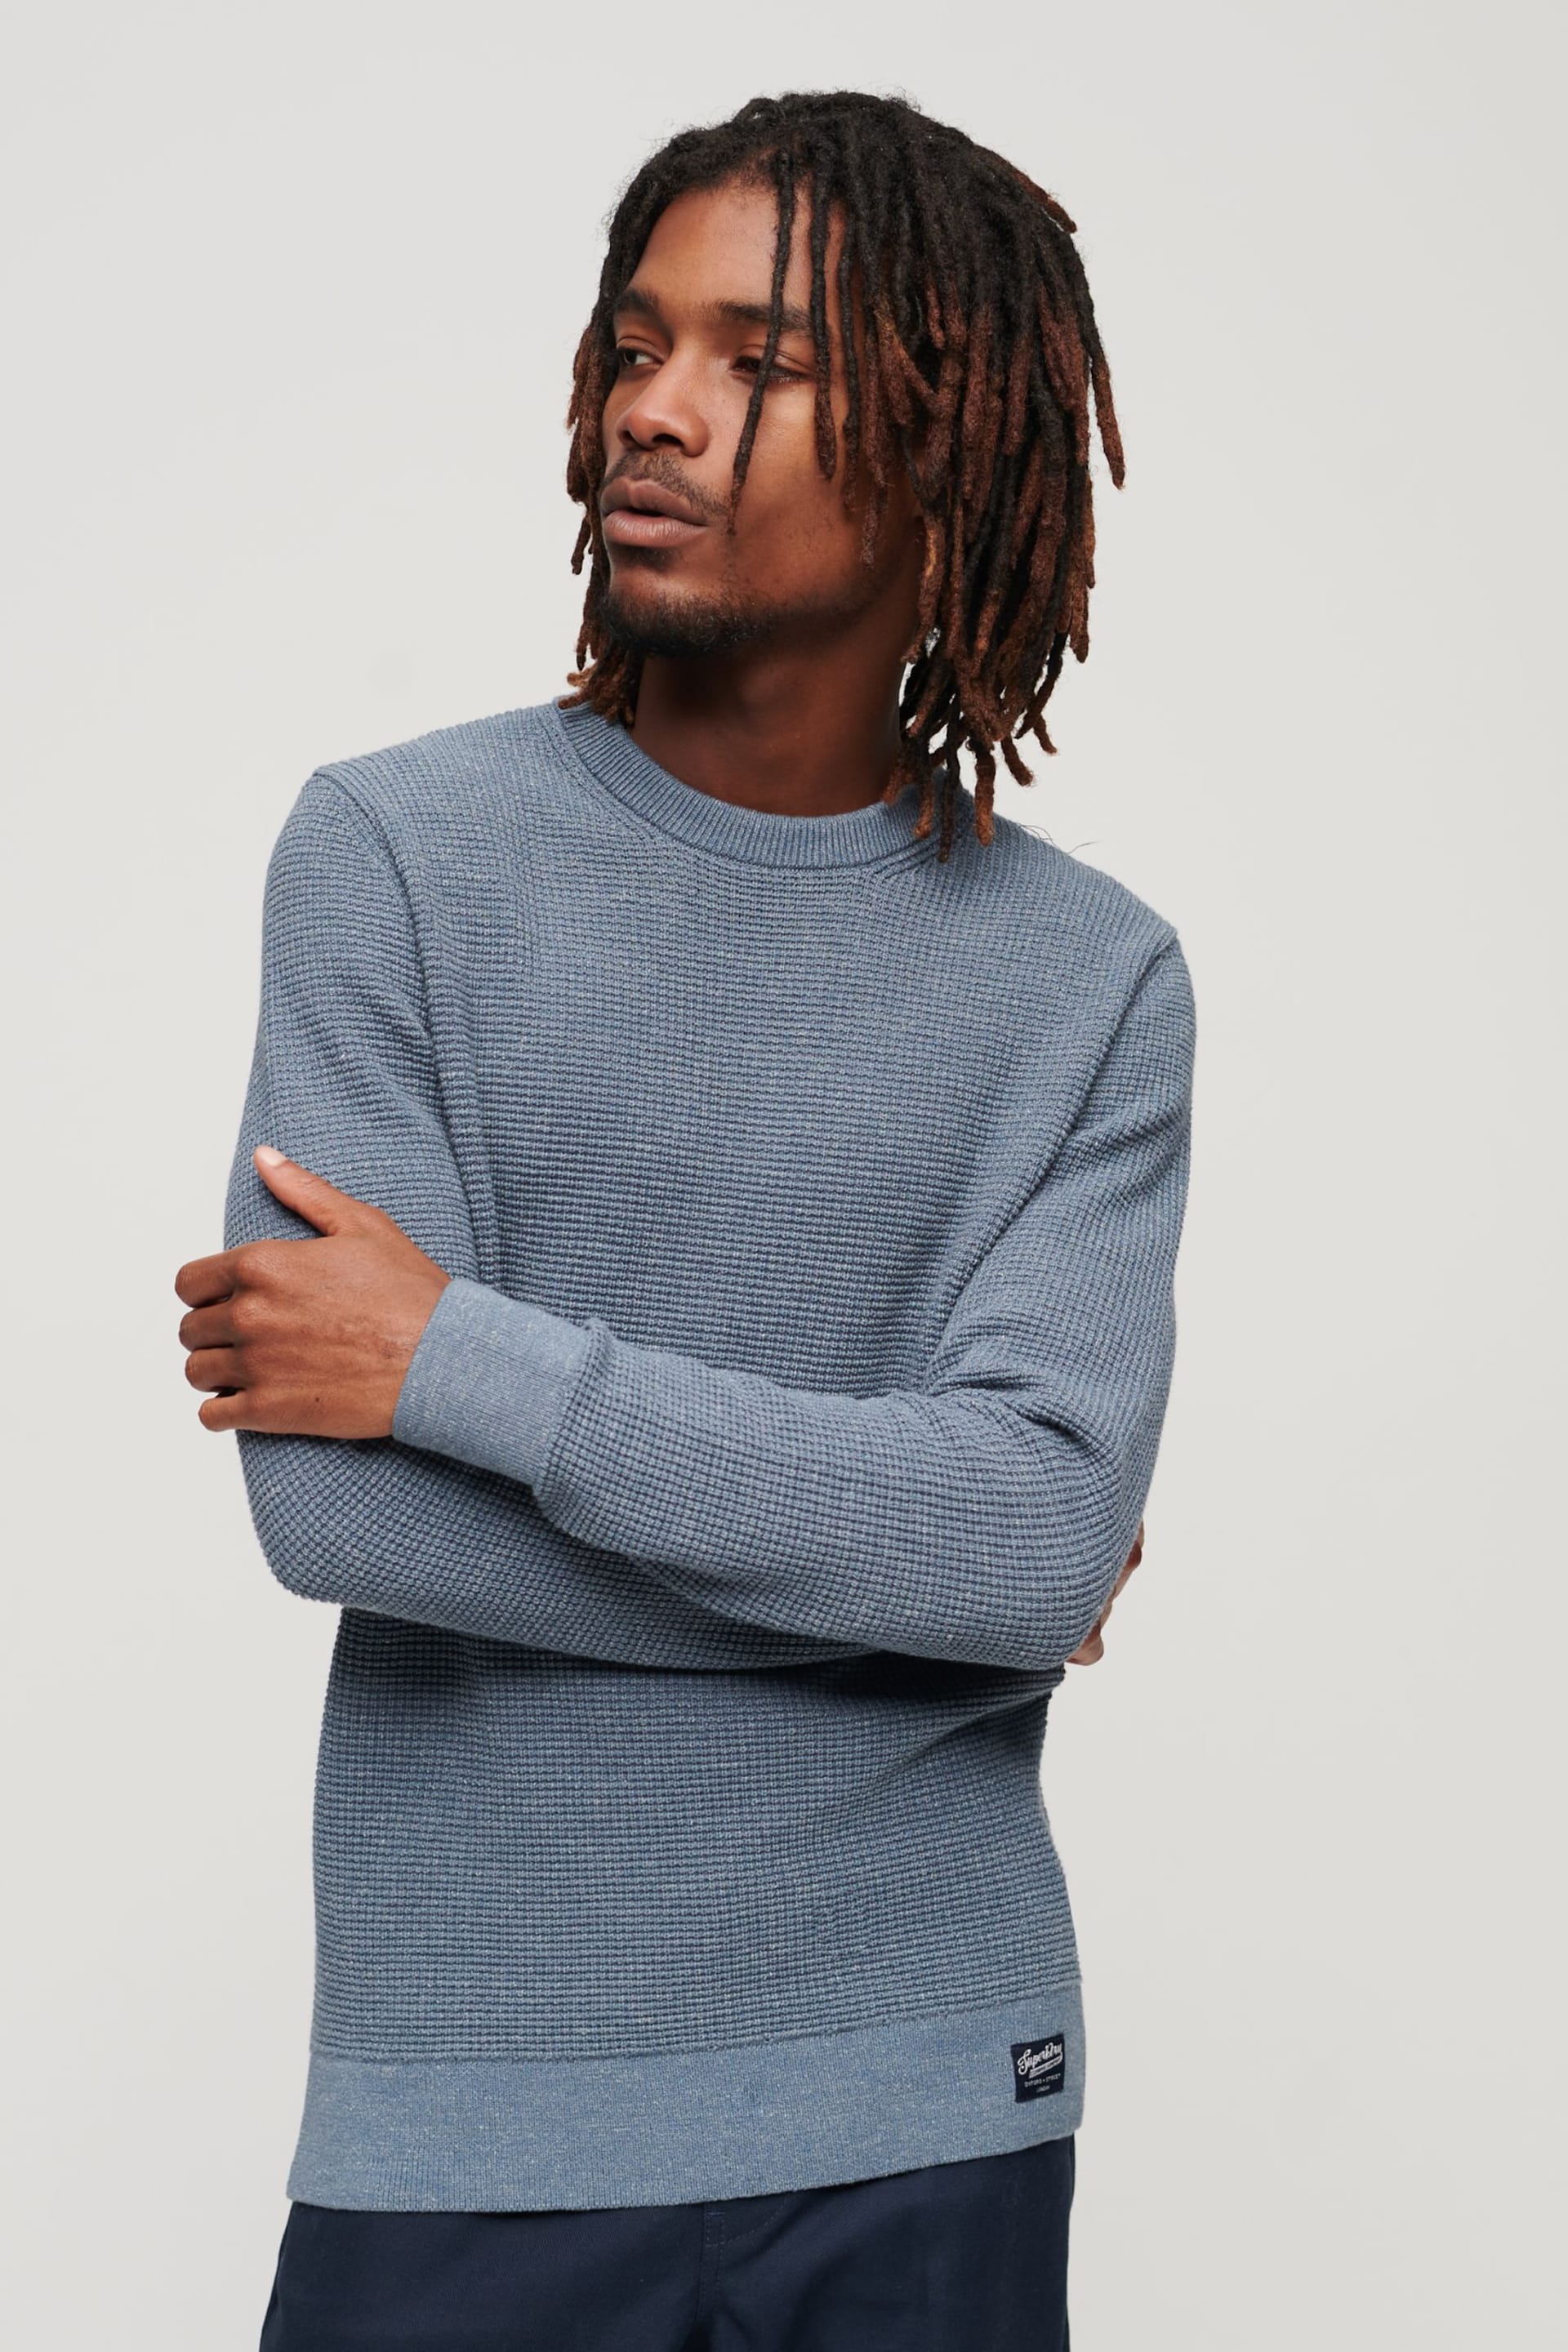 Superdry Blue Textured Crew Knit Jumper - Image 1 of 3